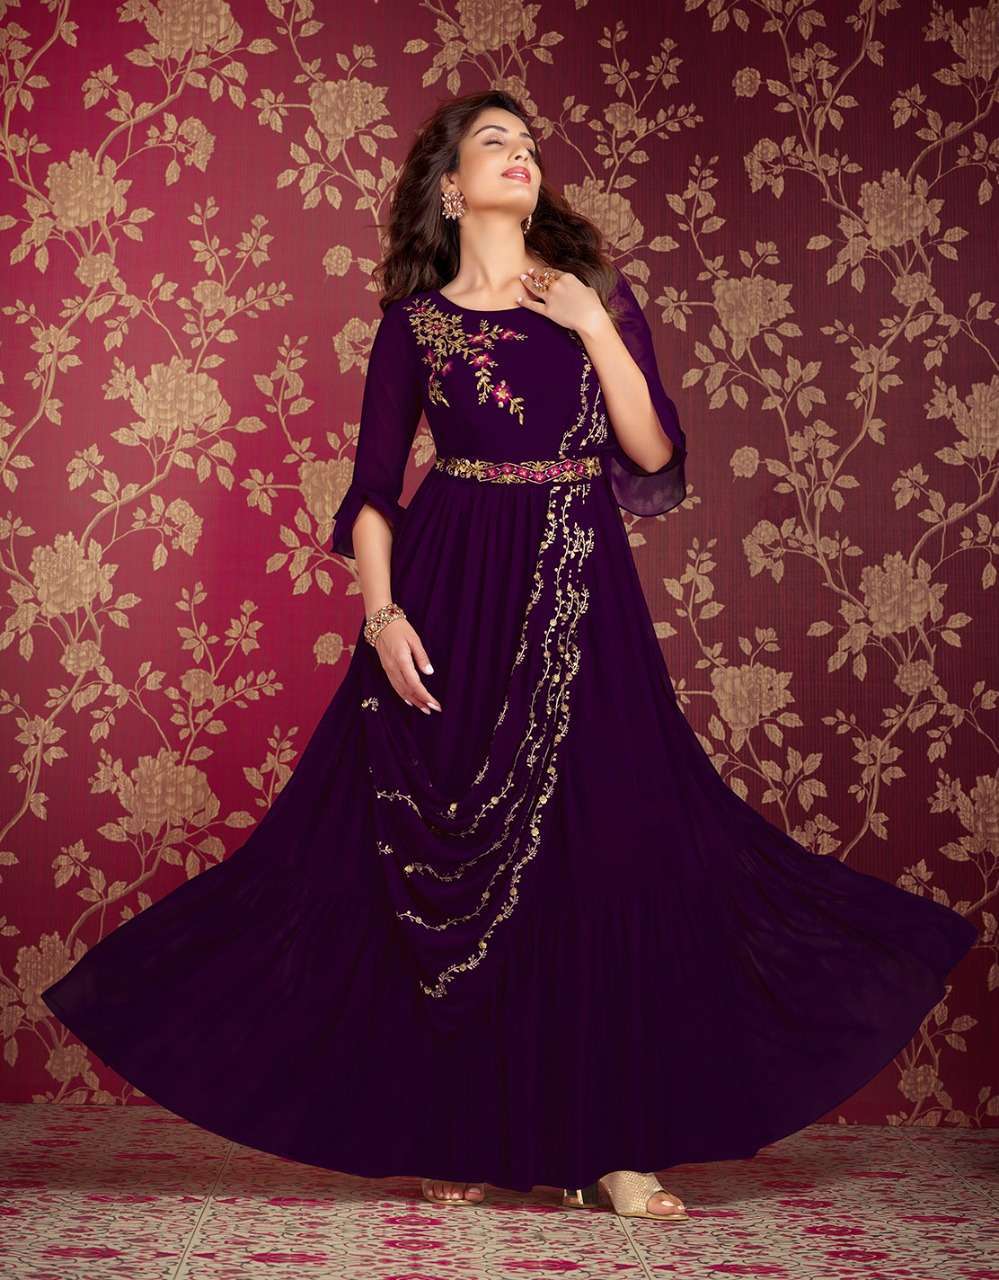 Stylemax - Almirah vol.3 daawat Party Wear Readymade Latest Gown Gown  Ladies clothing wholesalers in Surat India